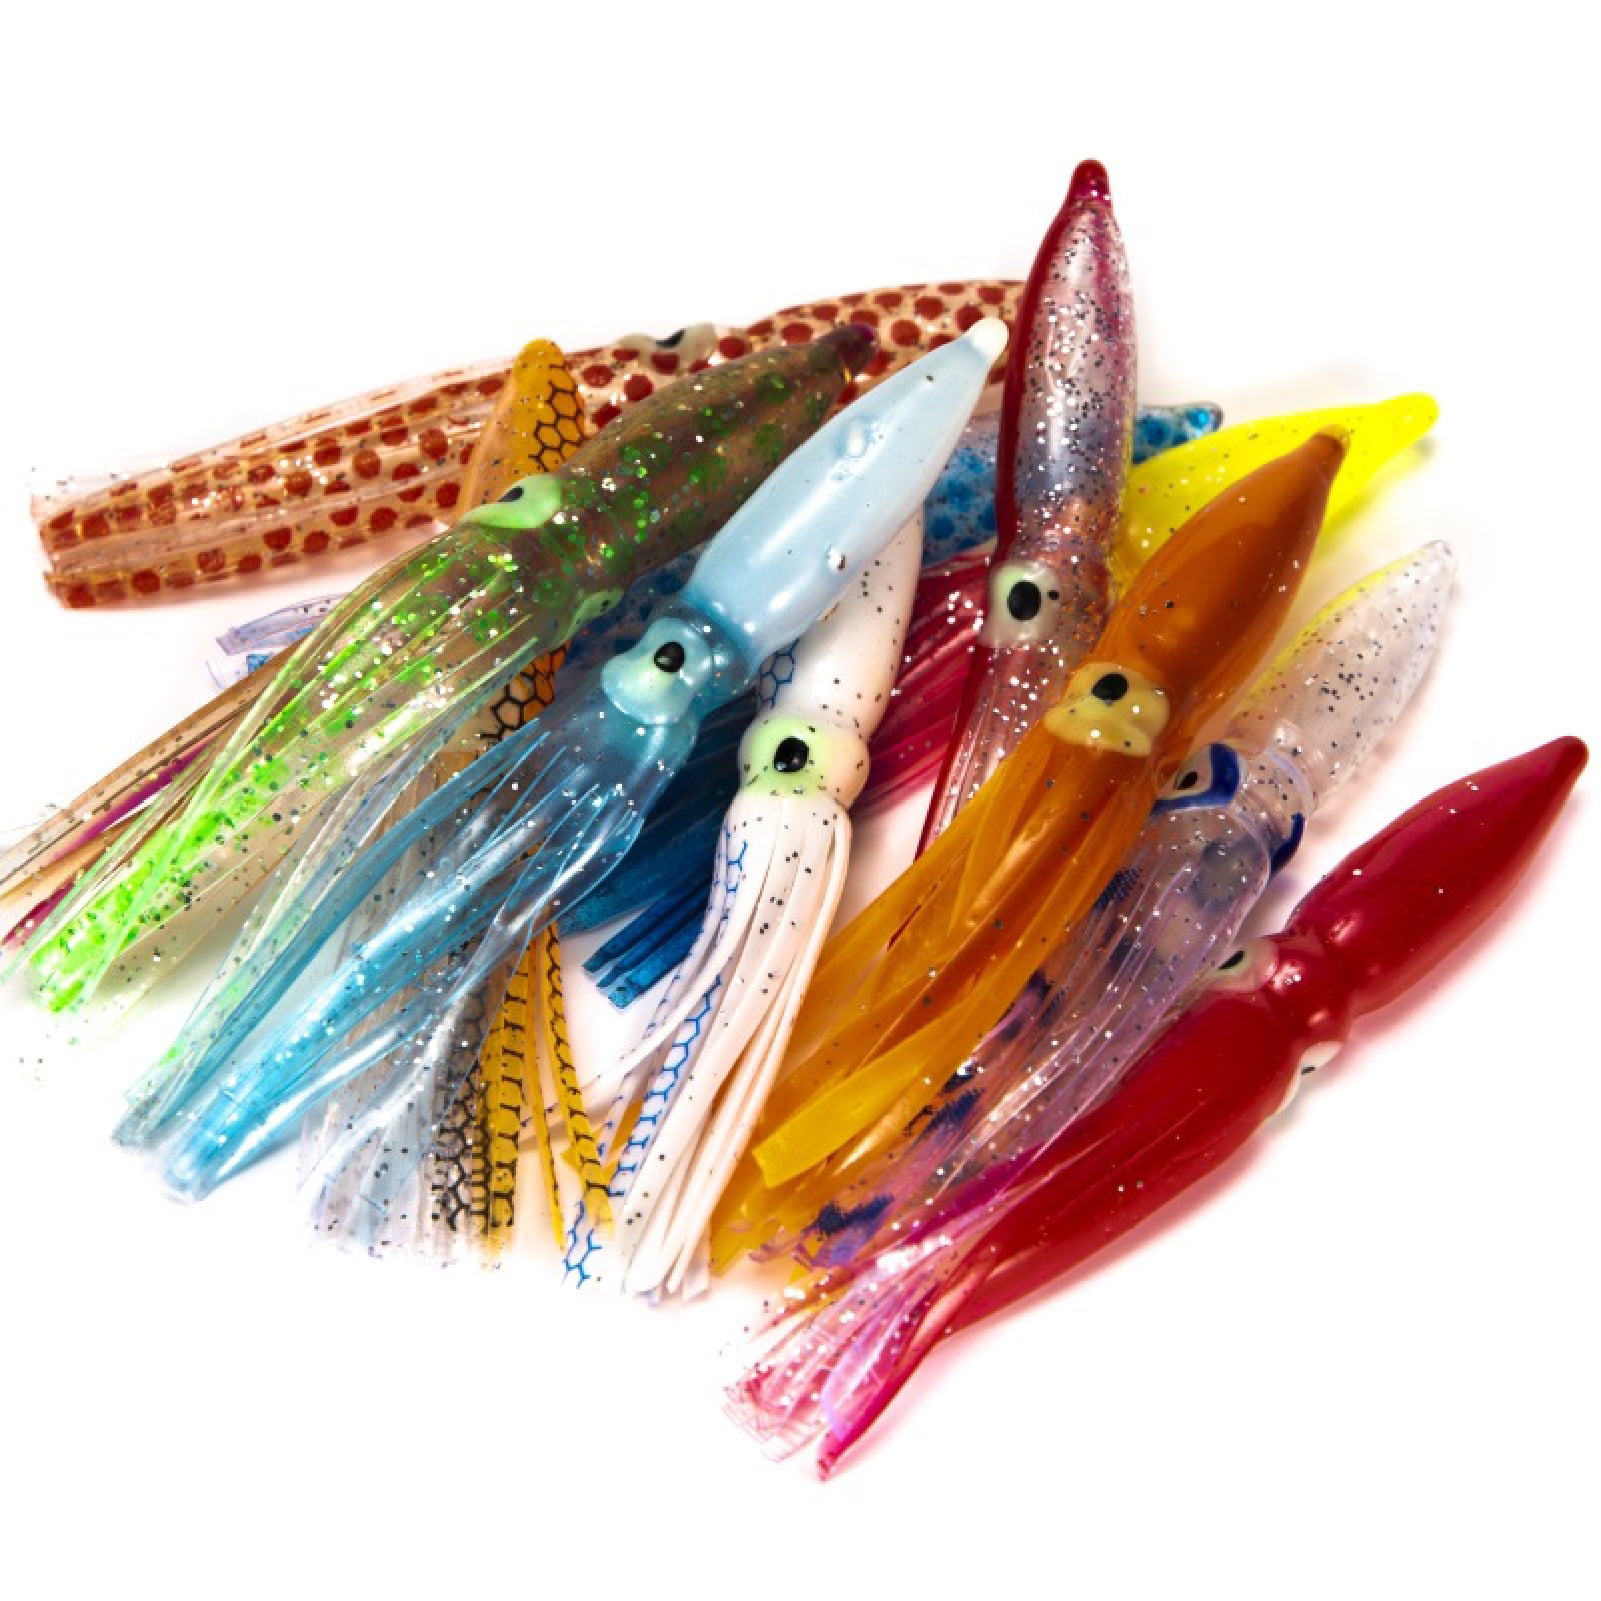  Luminous Octopus Squid Skirts Fishing Lures, 2/5PCS Glow  Octopus Skirt Soft Fishing Bait Trolling Fishing Lures Multiple Colors  Available Fishing Accessories Saltwater Fishing Tackle : Sports & Outdoors